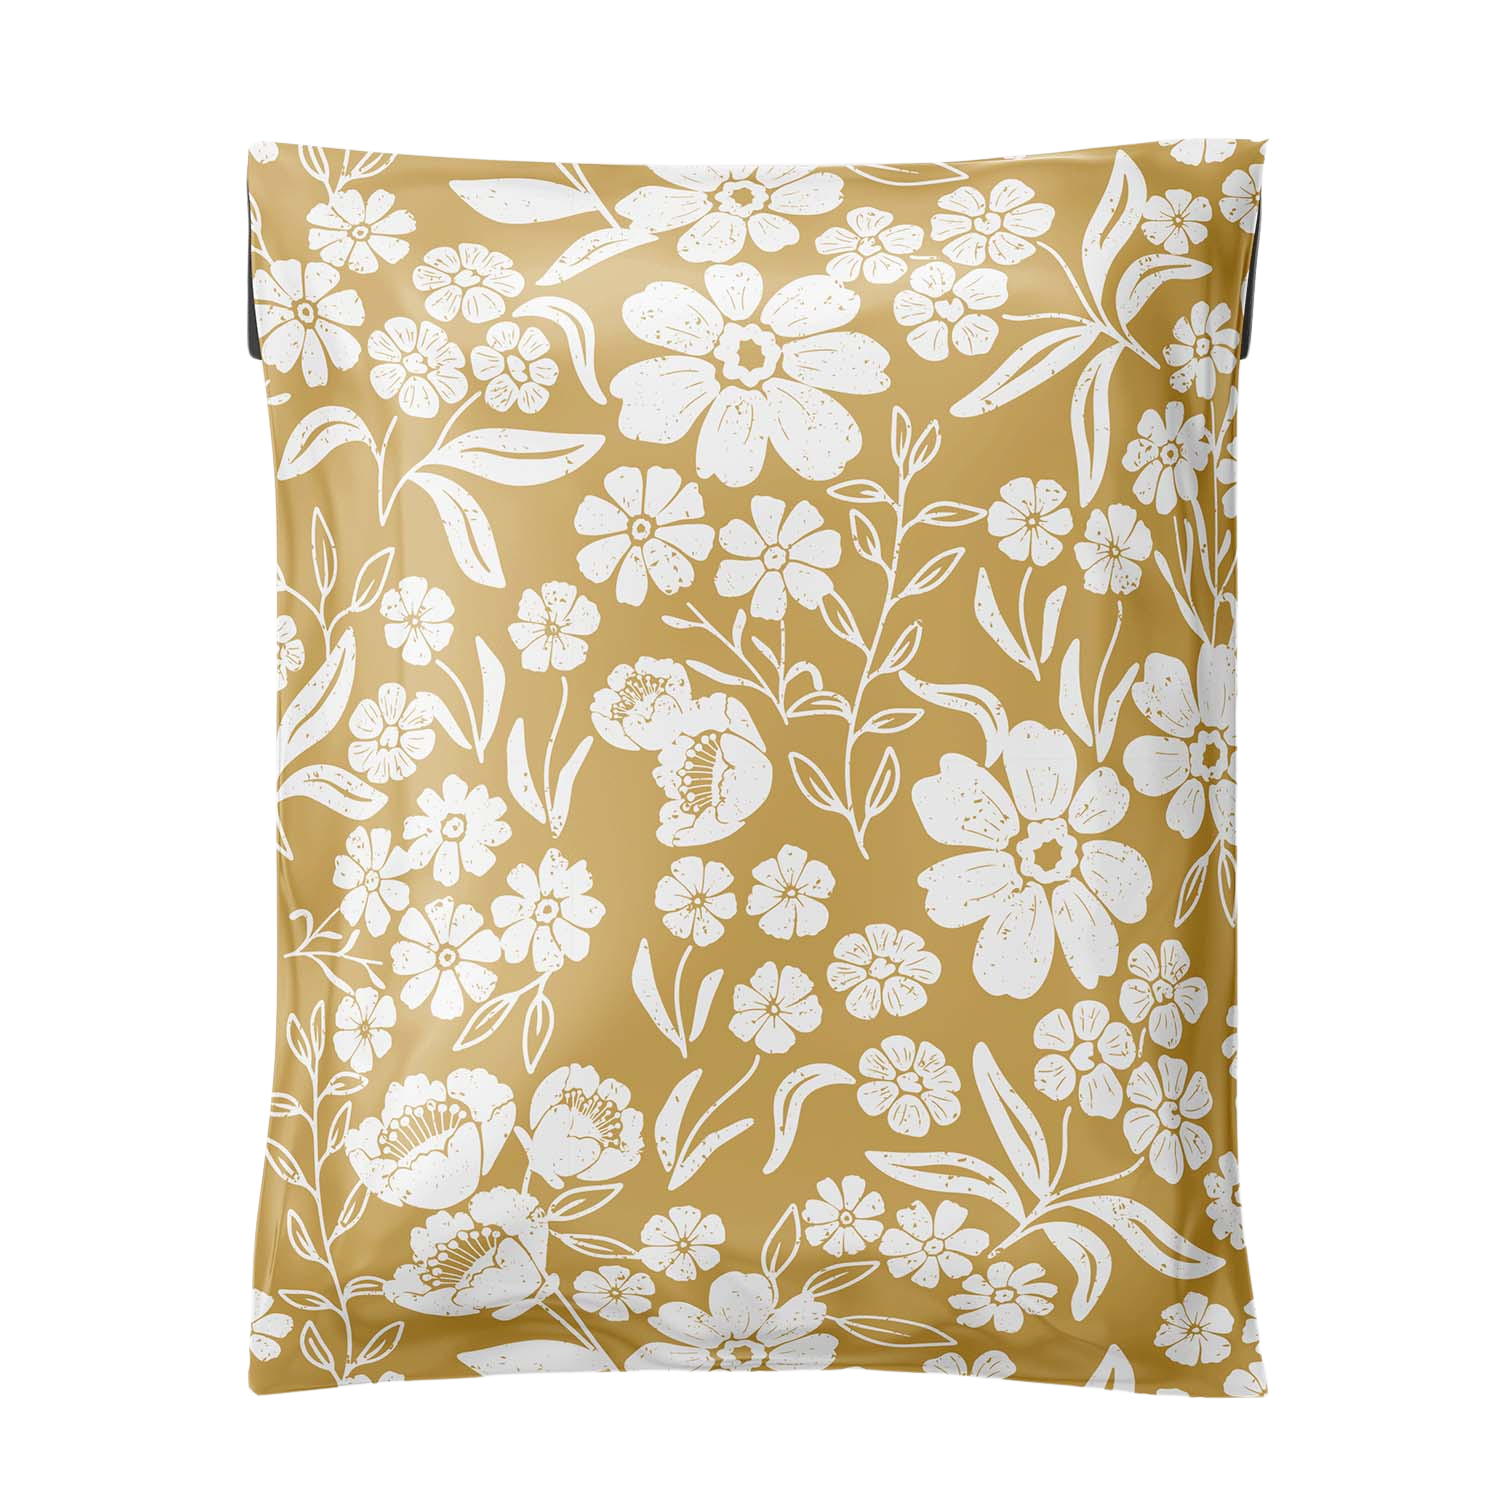 6x9 Poly Bags for Shipping: Floral Block Print (Yellow)